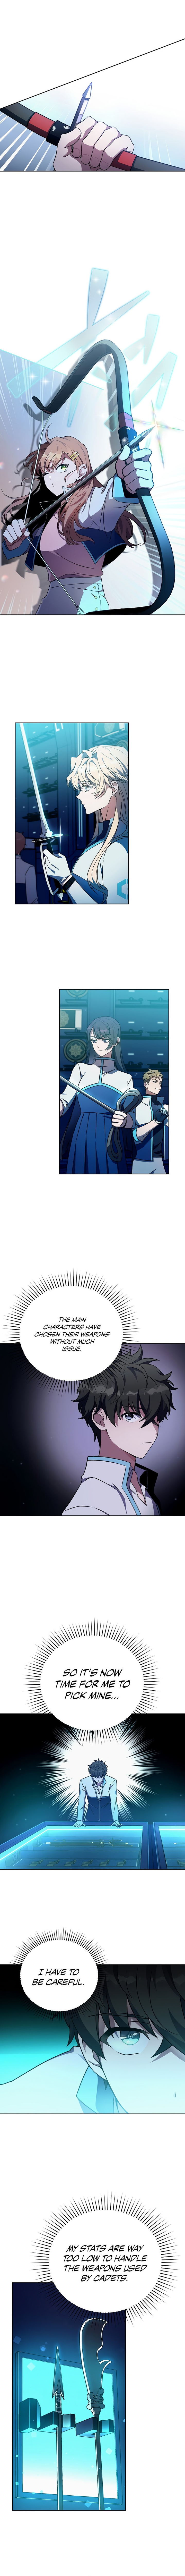 the-novels-extra-remake-chap-3-11